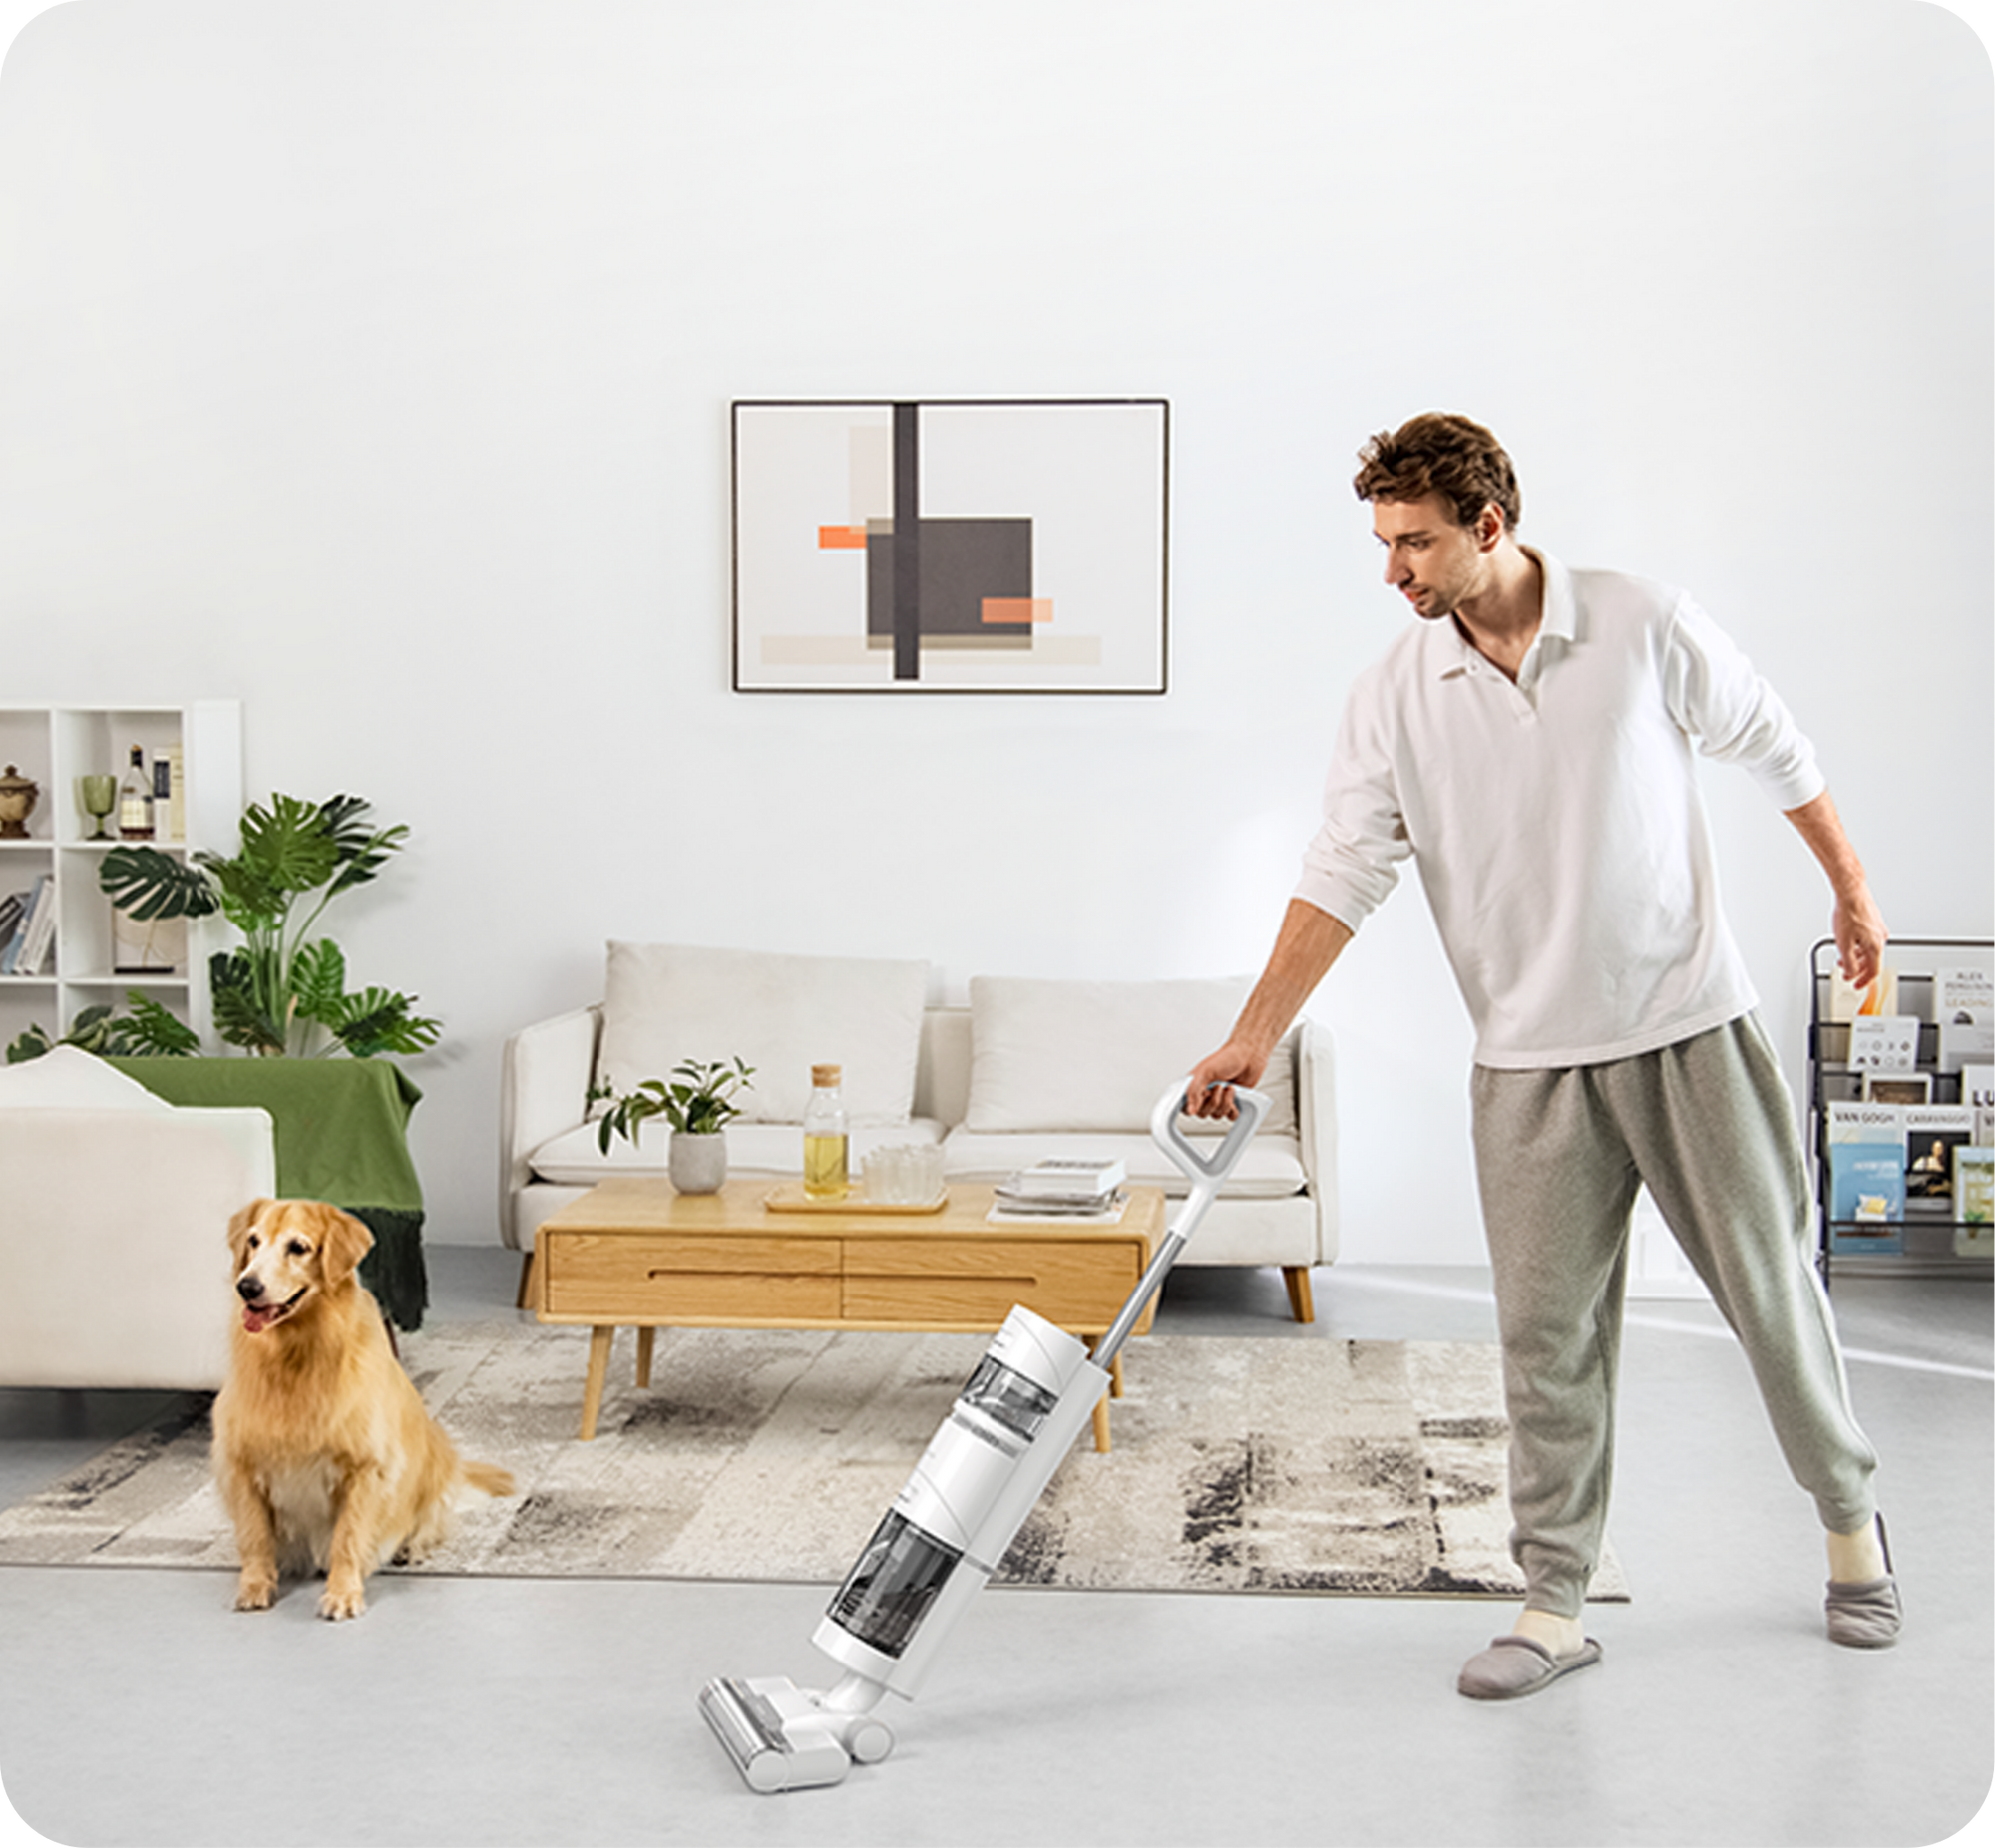 Dreame H11 Wet and Dry Vacuum Dreame H11 Wet and Dry Vacuum  One pass. All clean. €299,99   Max Mode Powerful Cleaning   30min Runtime   900ml Clean Water Tank   500ml Used Water Tank Erases household messes, both wet and dry. Vacuums and mops at the same